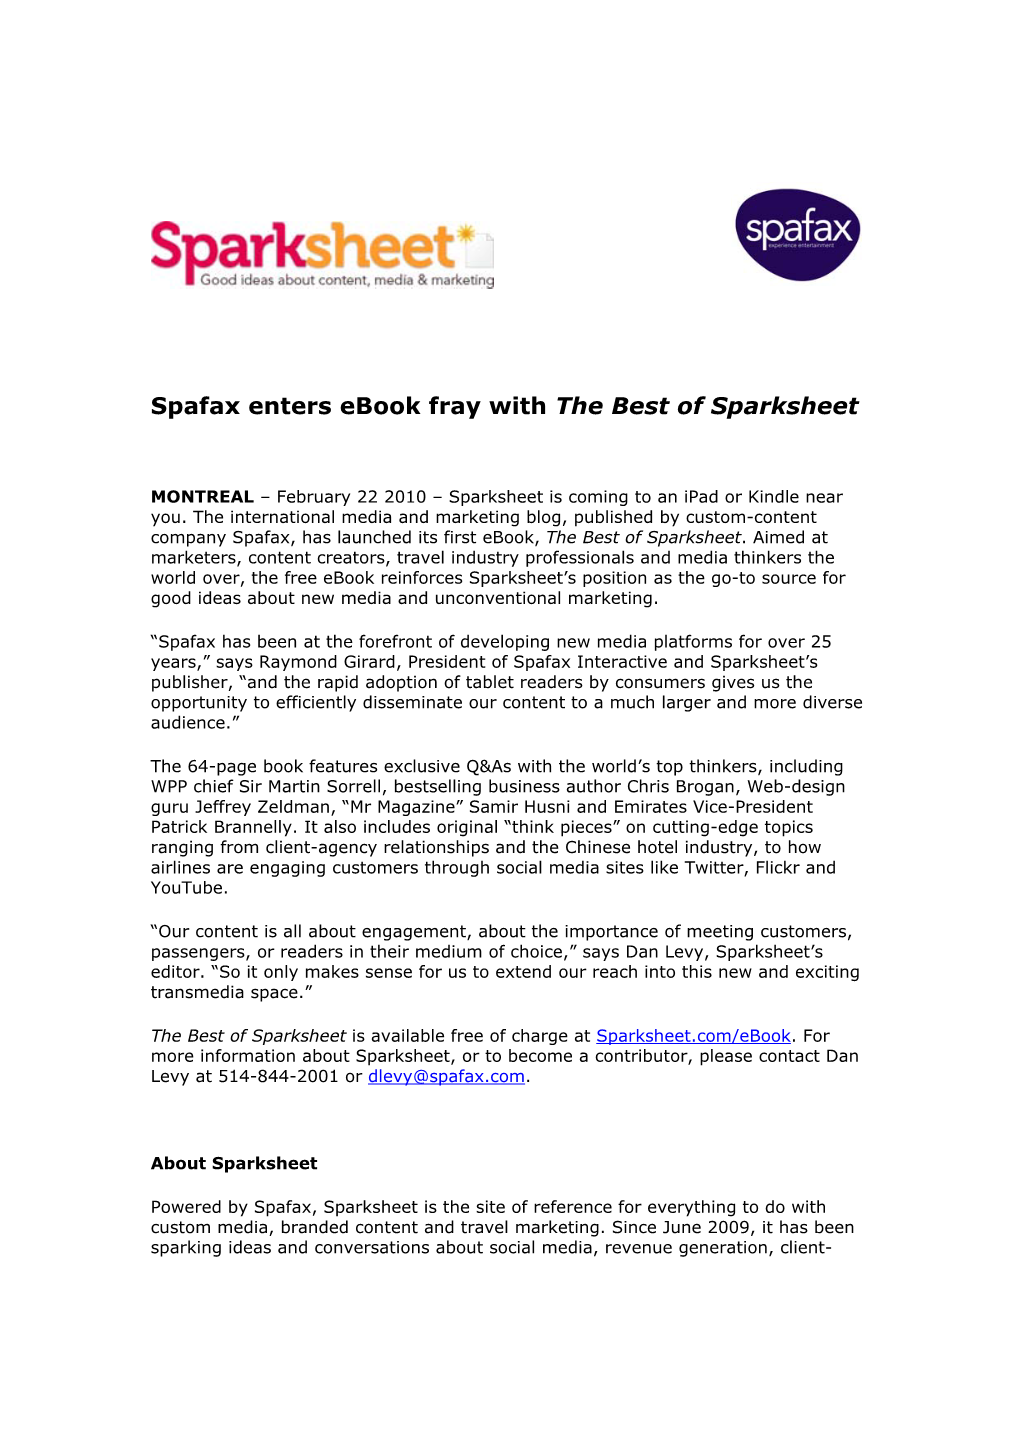 Spafax Enters Ebook Fray with the Best of Sparksheet